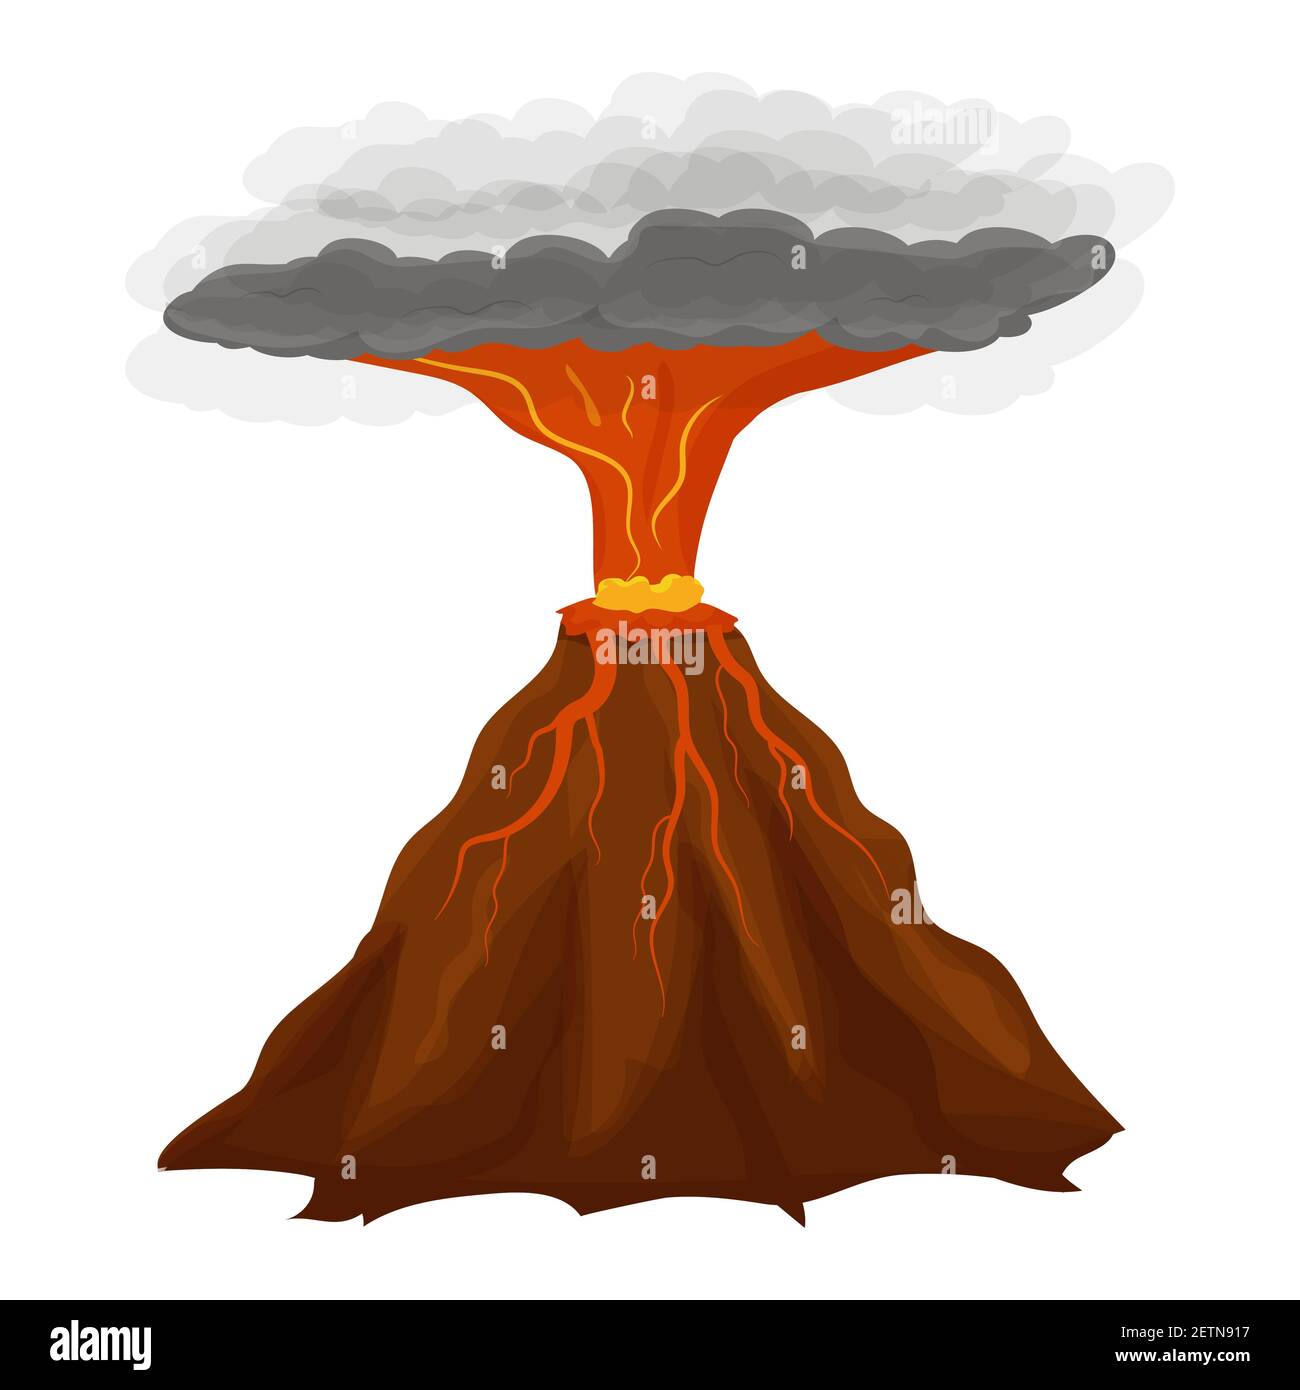 Volcano eruption in cartoon style isolated on white background stock vector illustration. Active mountain, explosion with lava and smoke. Element, boulder. Vector illustration Stock Vector